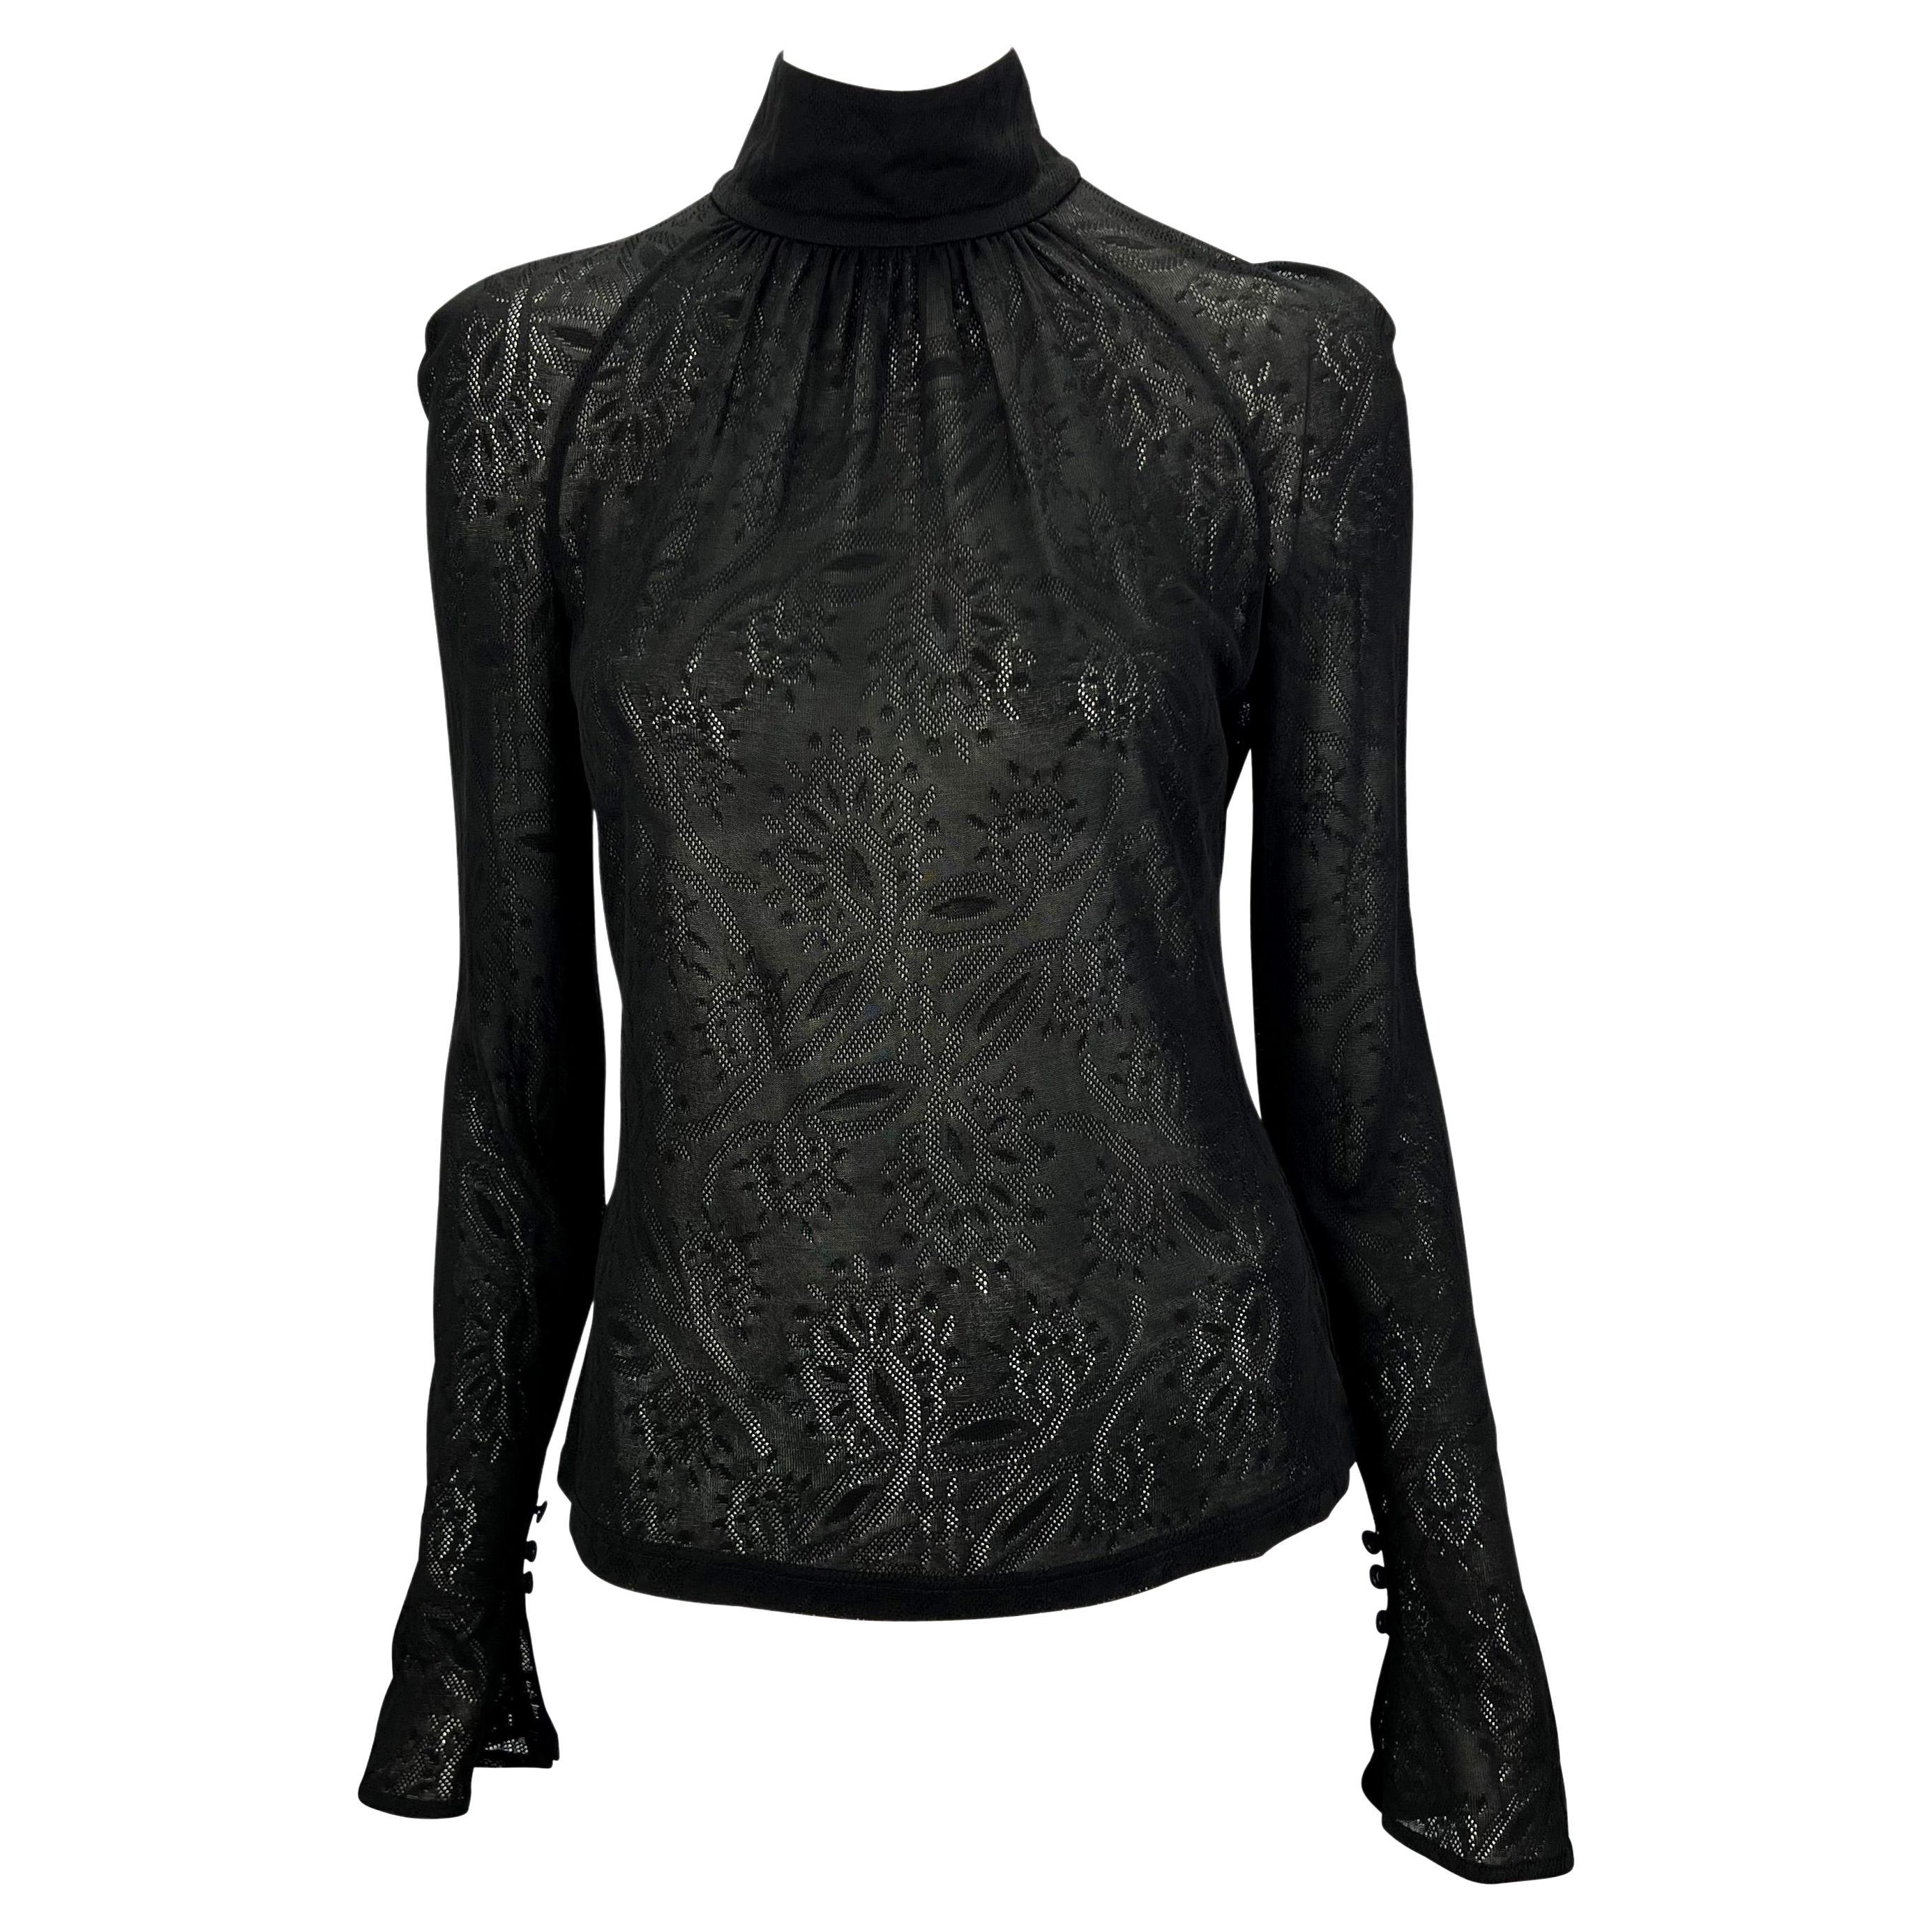 2000s Gianni Versace by Donatella Black Sheer Lace Flare Mock Neck Top